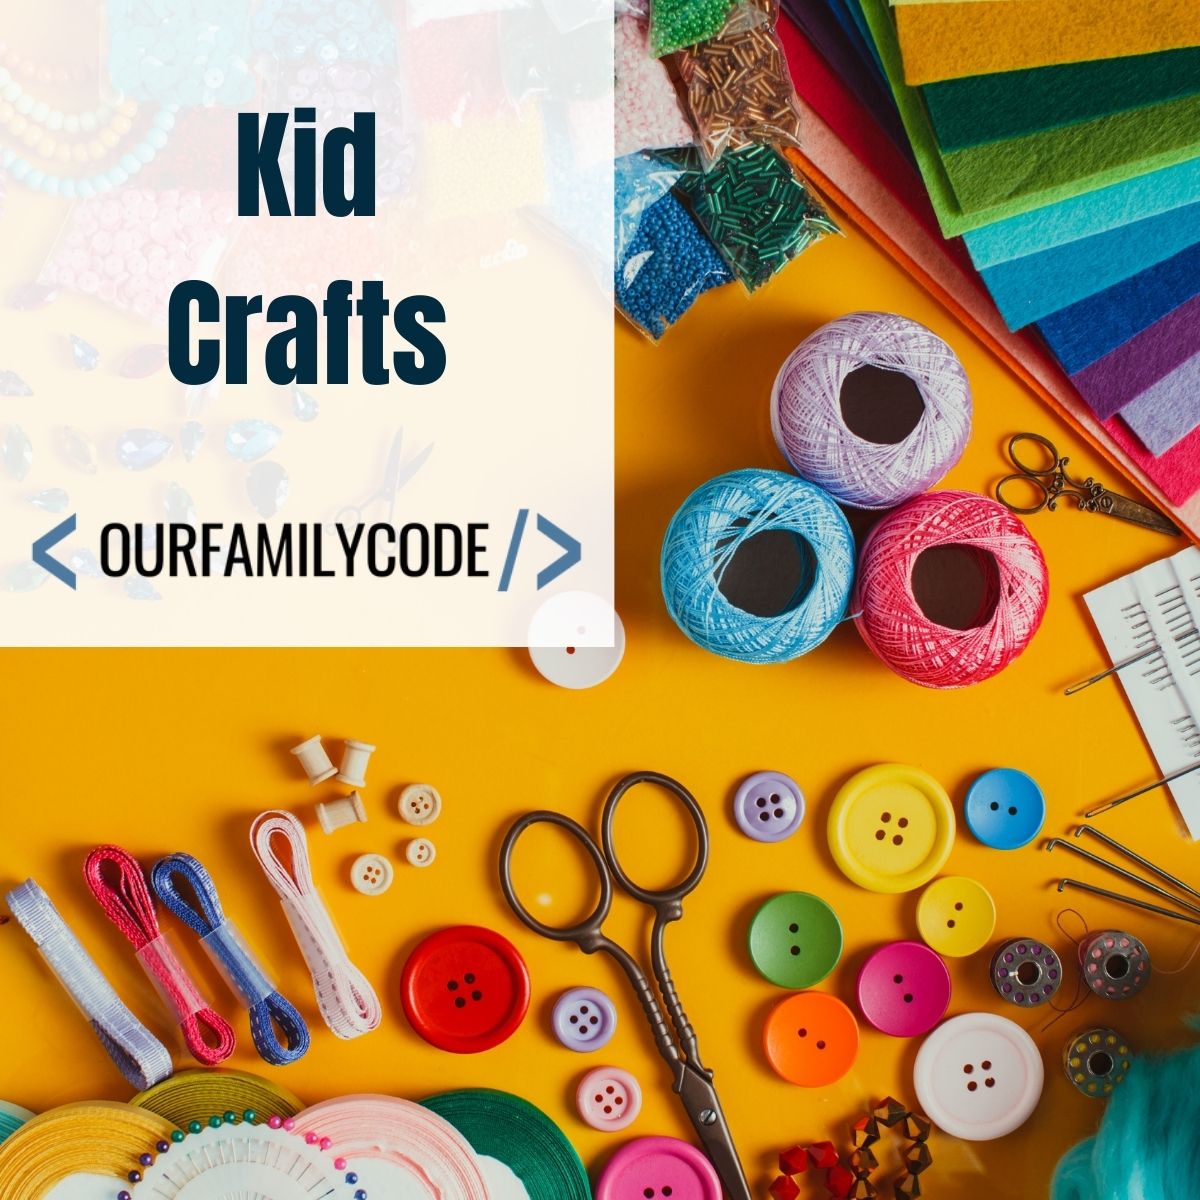 kid crafts category image